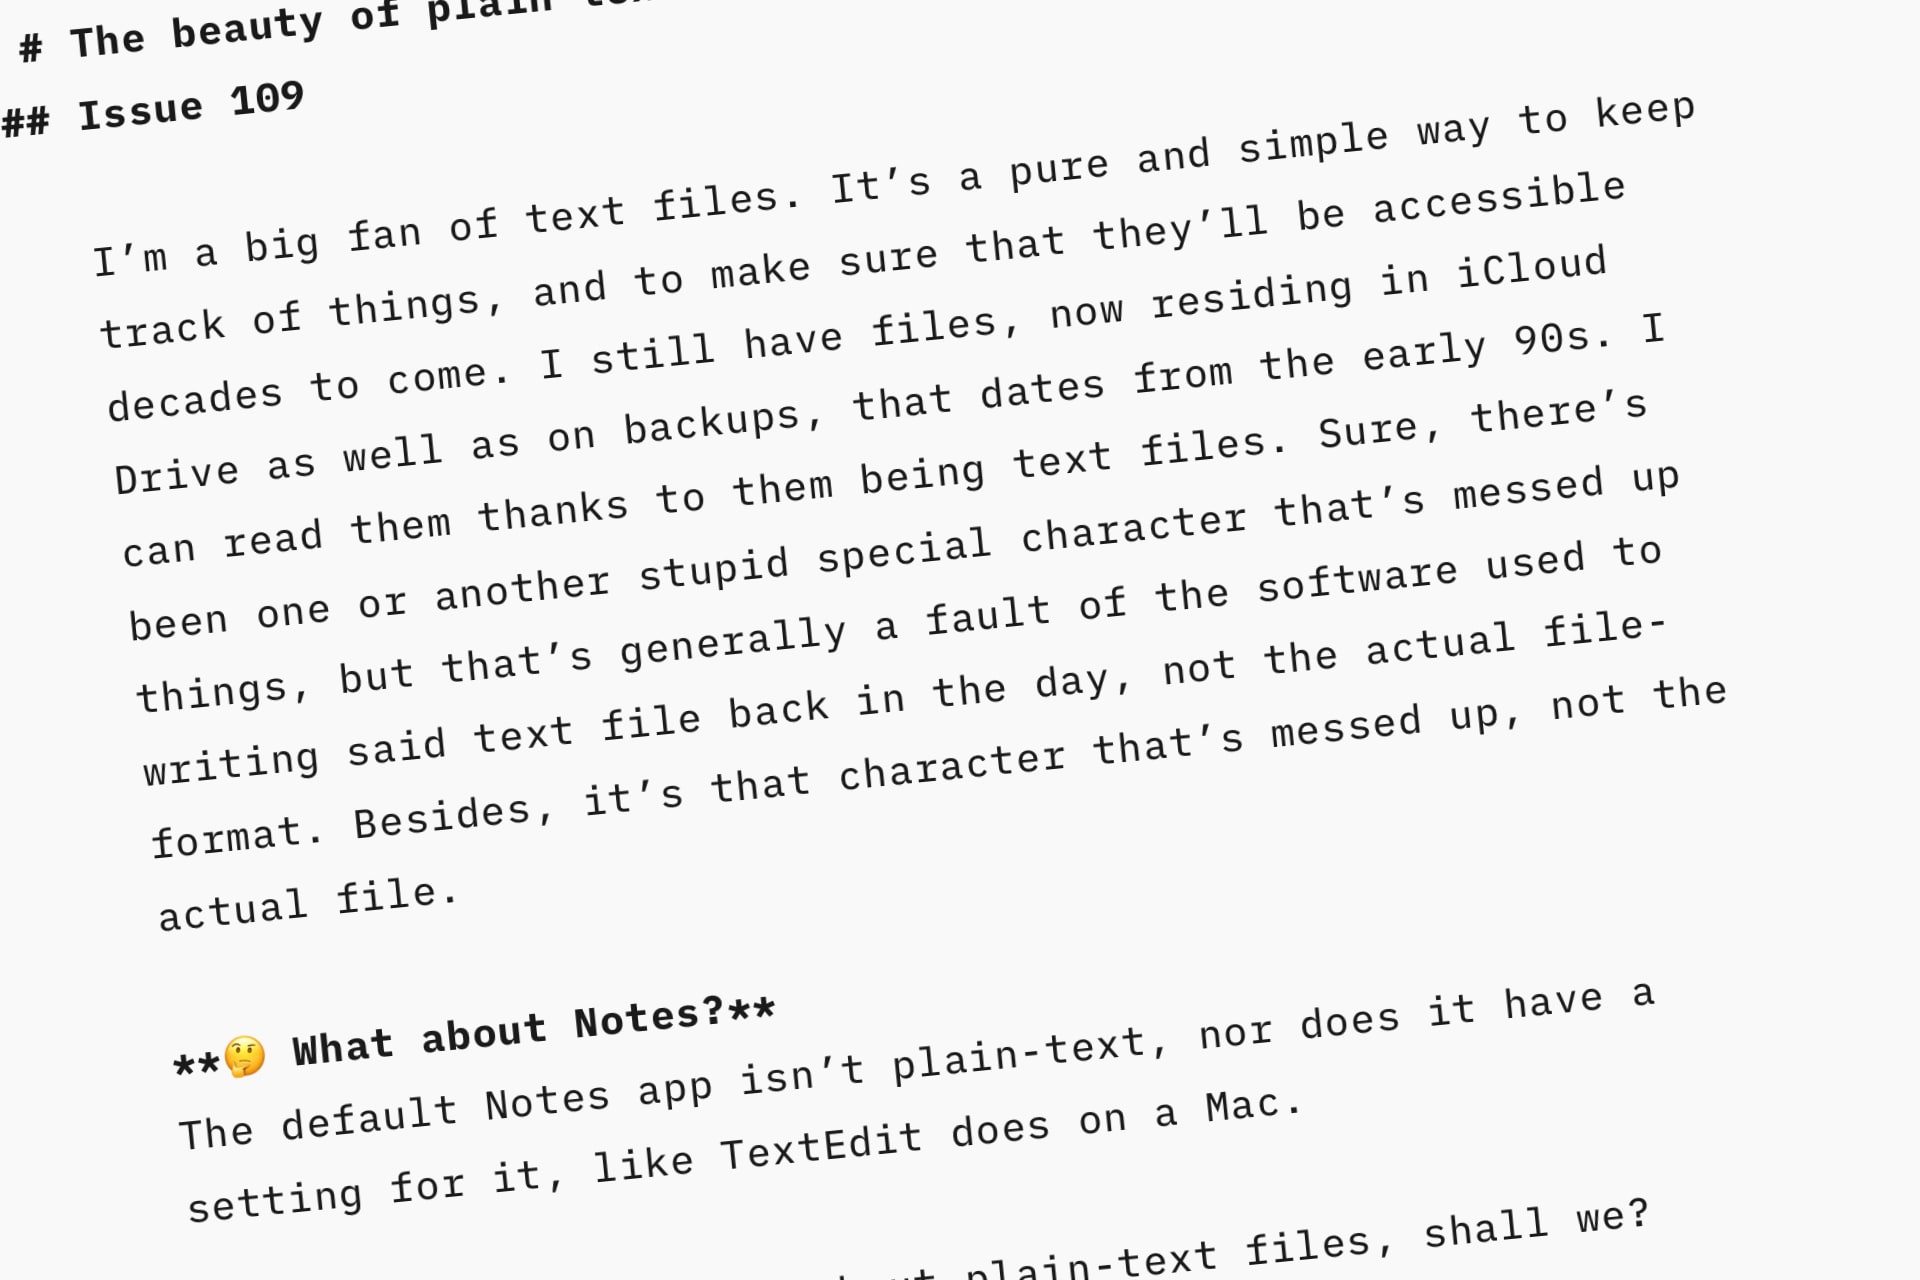 Issue #109: The beauty of plain-text